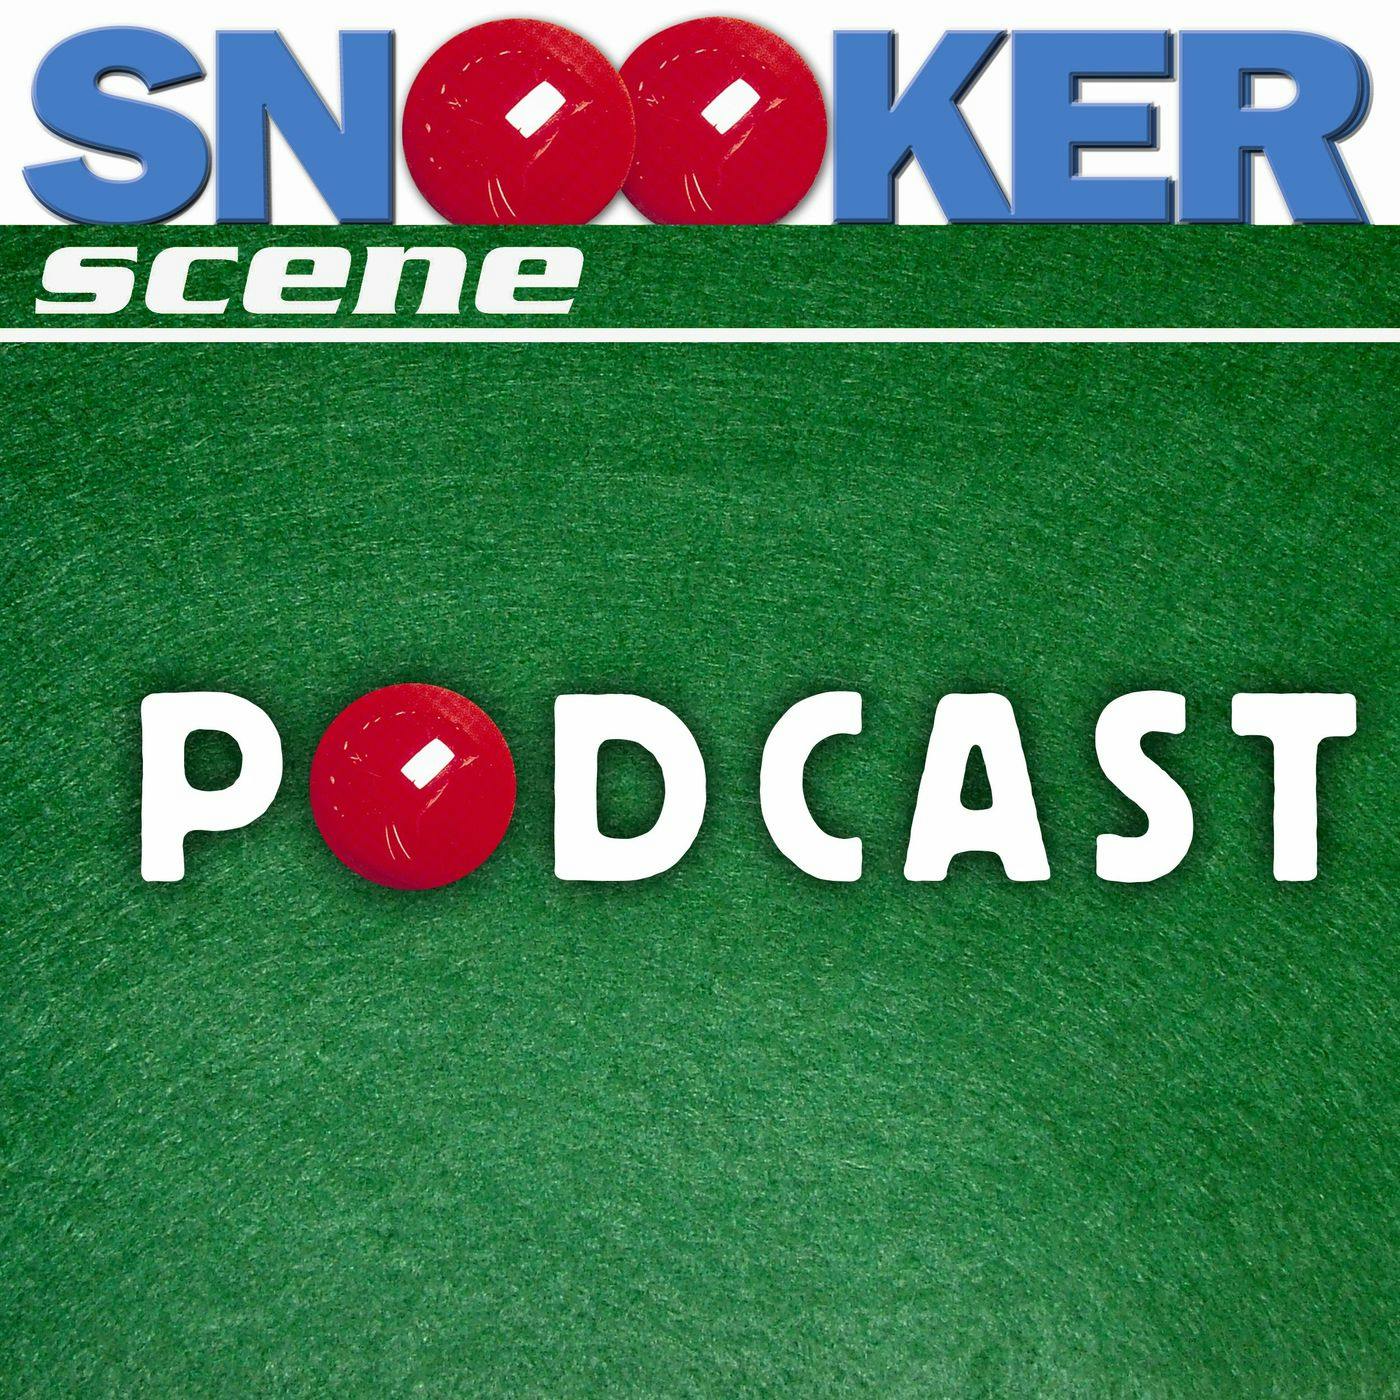 Snooker Scene Podcast episode 154 - The Fab Four